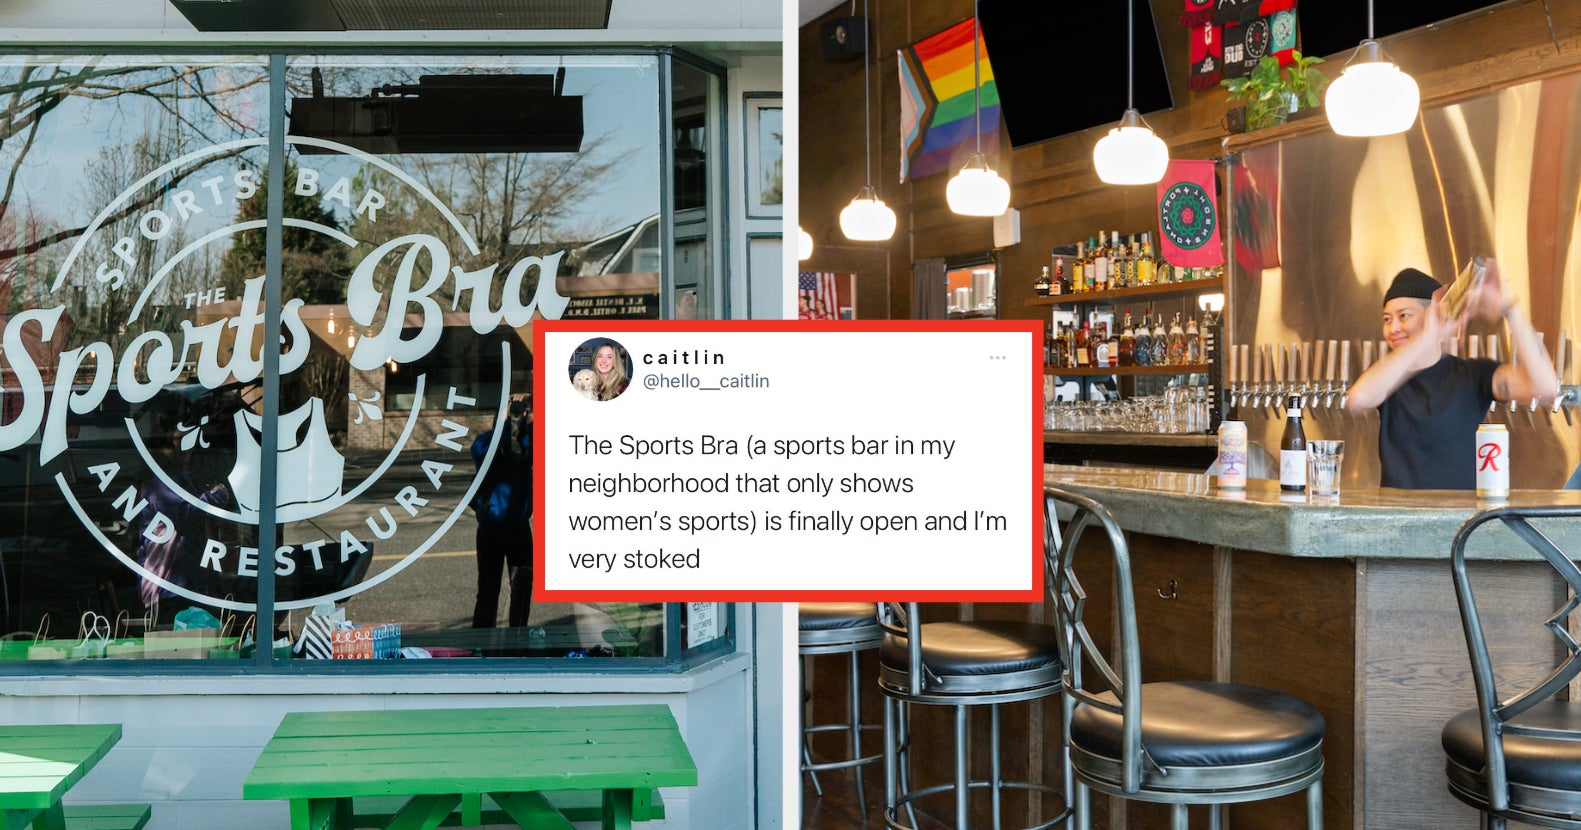 This Sports Bar Only Shows Women's Sports